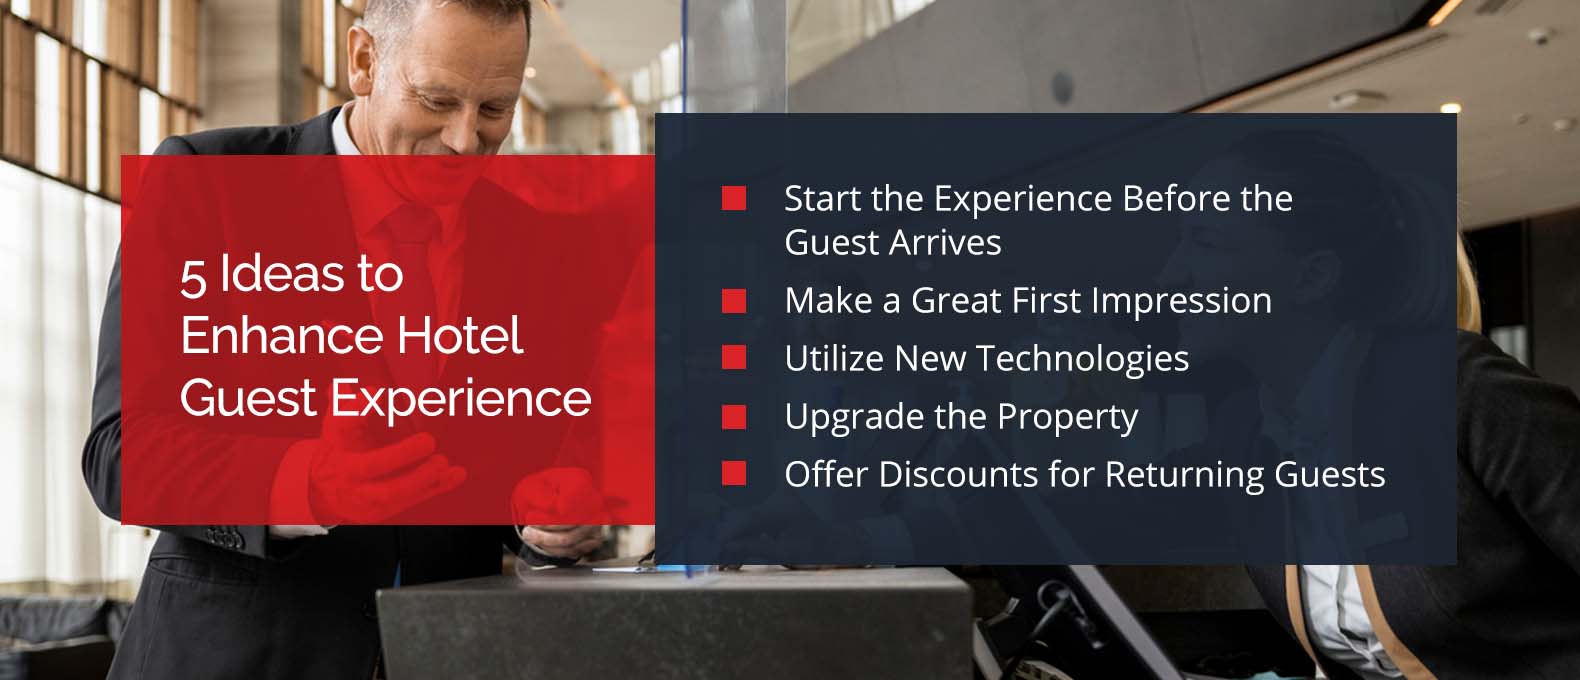 5 Ideas to Enhance Hotel Guest Experience